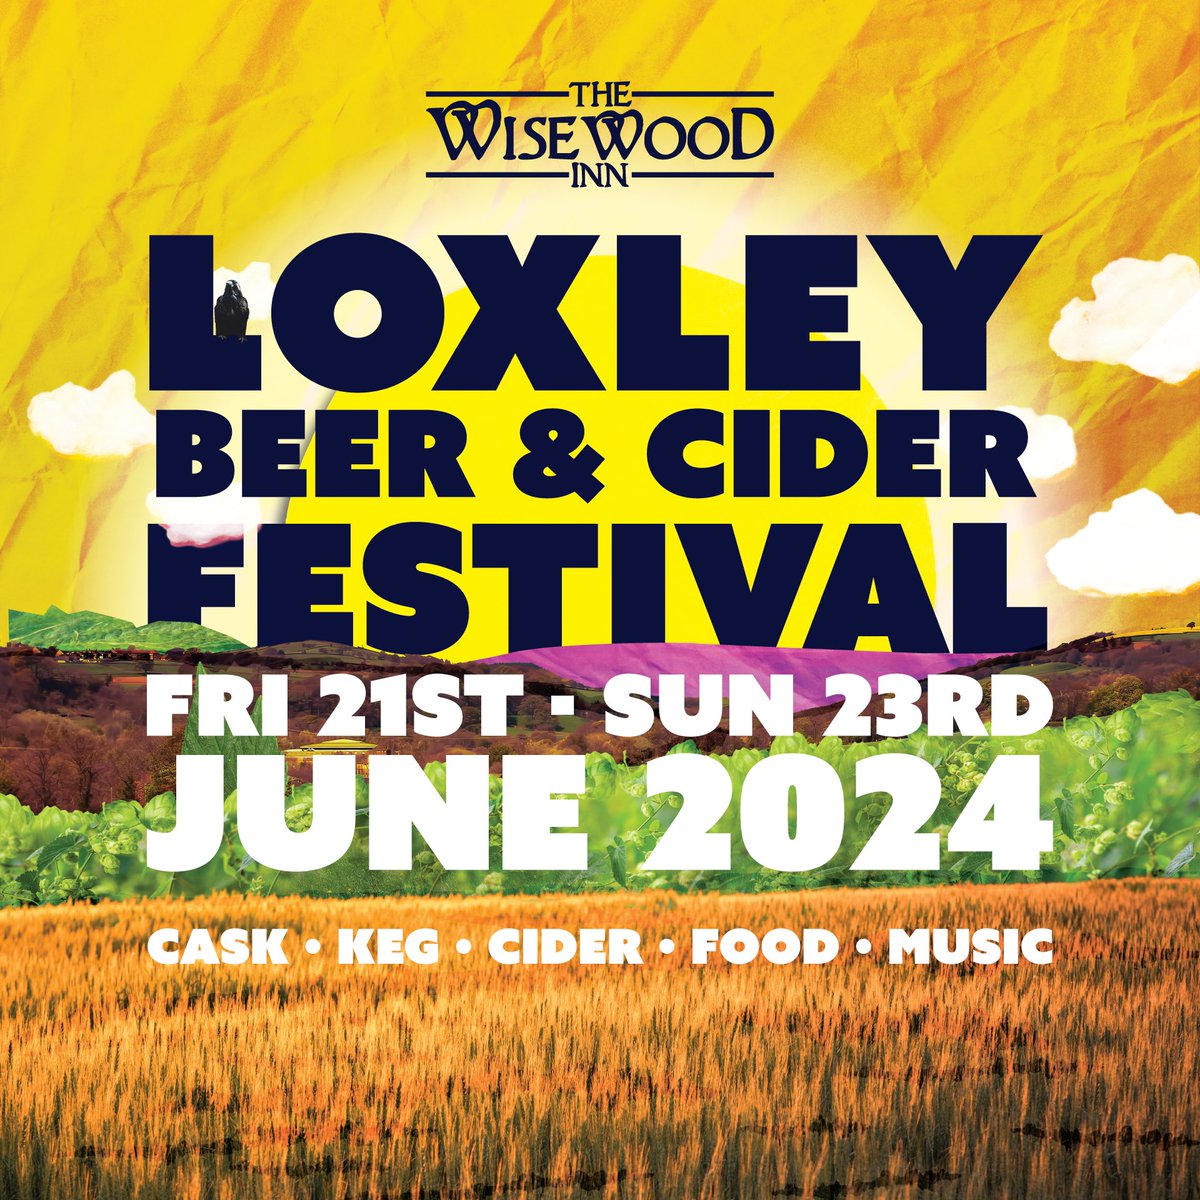 🍻Mark your calendars and raise a glass! Loxley Beer and Cider Festival is just around the corner. So tag your beer-loving pals and get ready for another fantastic weekend in The @Wisewood_Inn ‘s back garden!🎉

#Loxley #loxleybrewery #brewery #sheffield #yorkshire #beerfestival